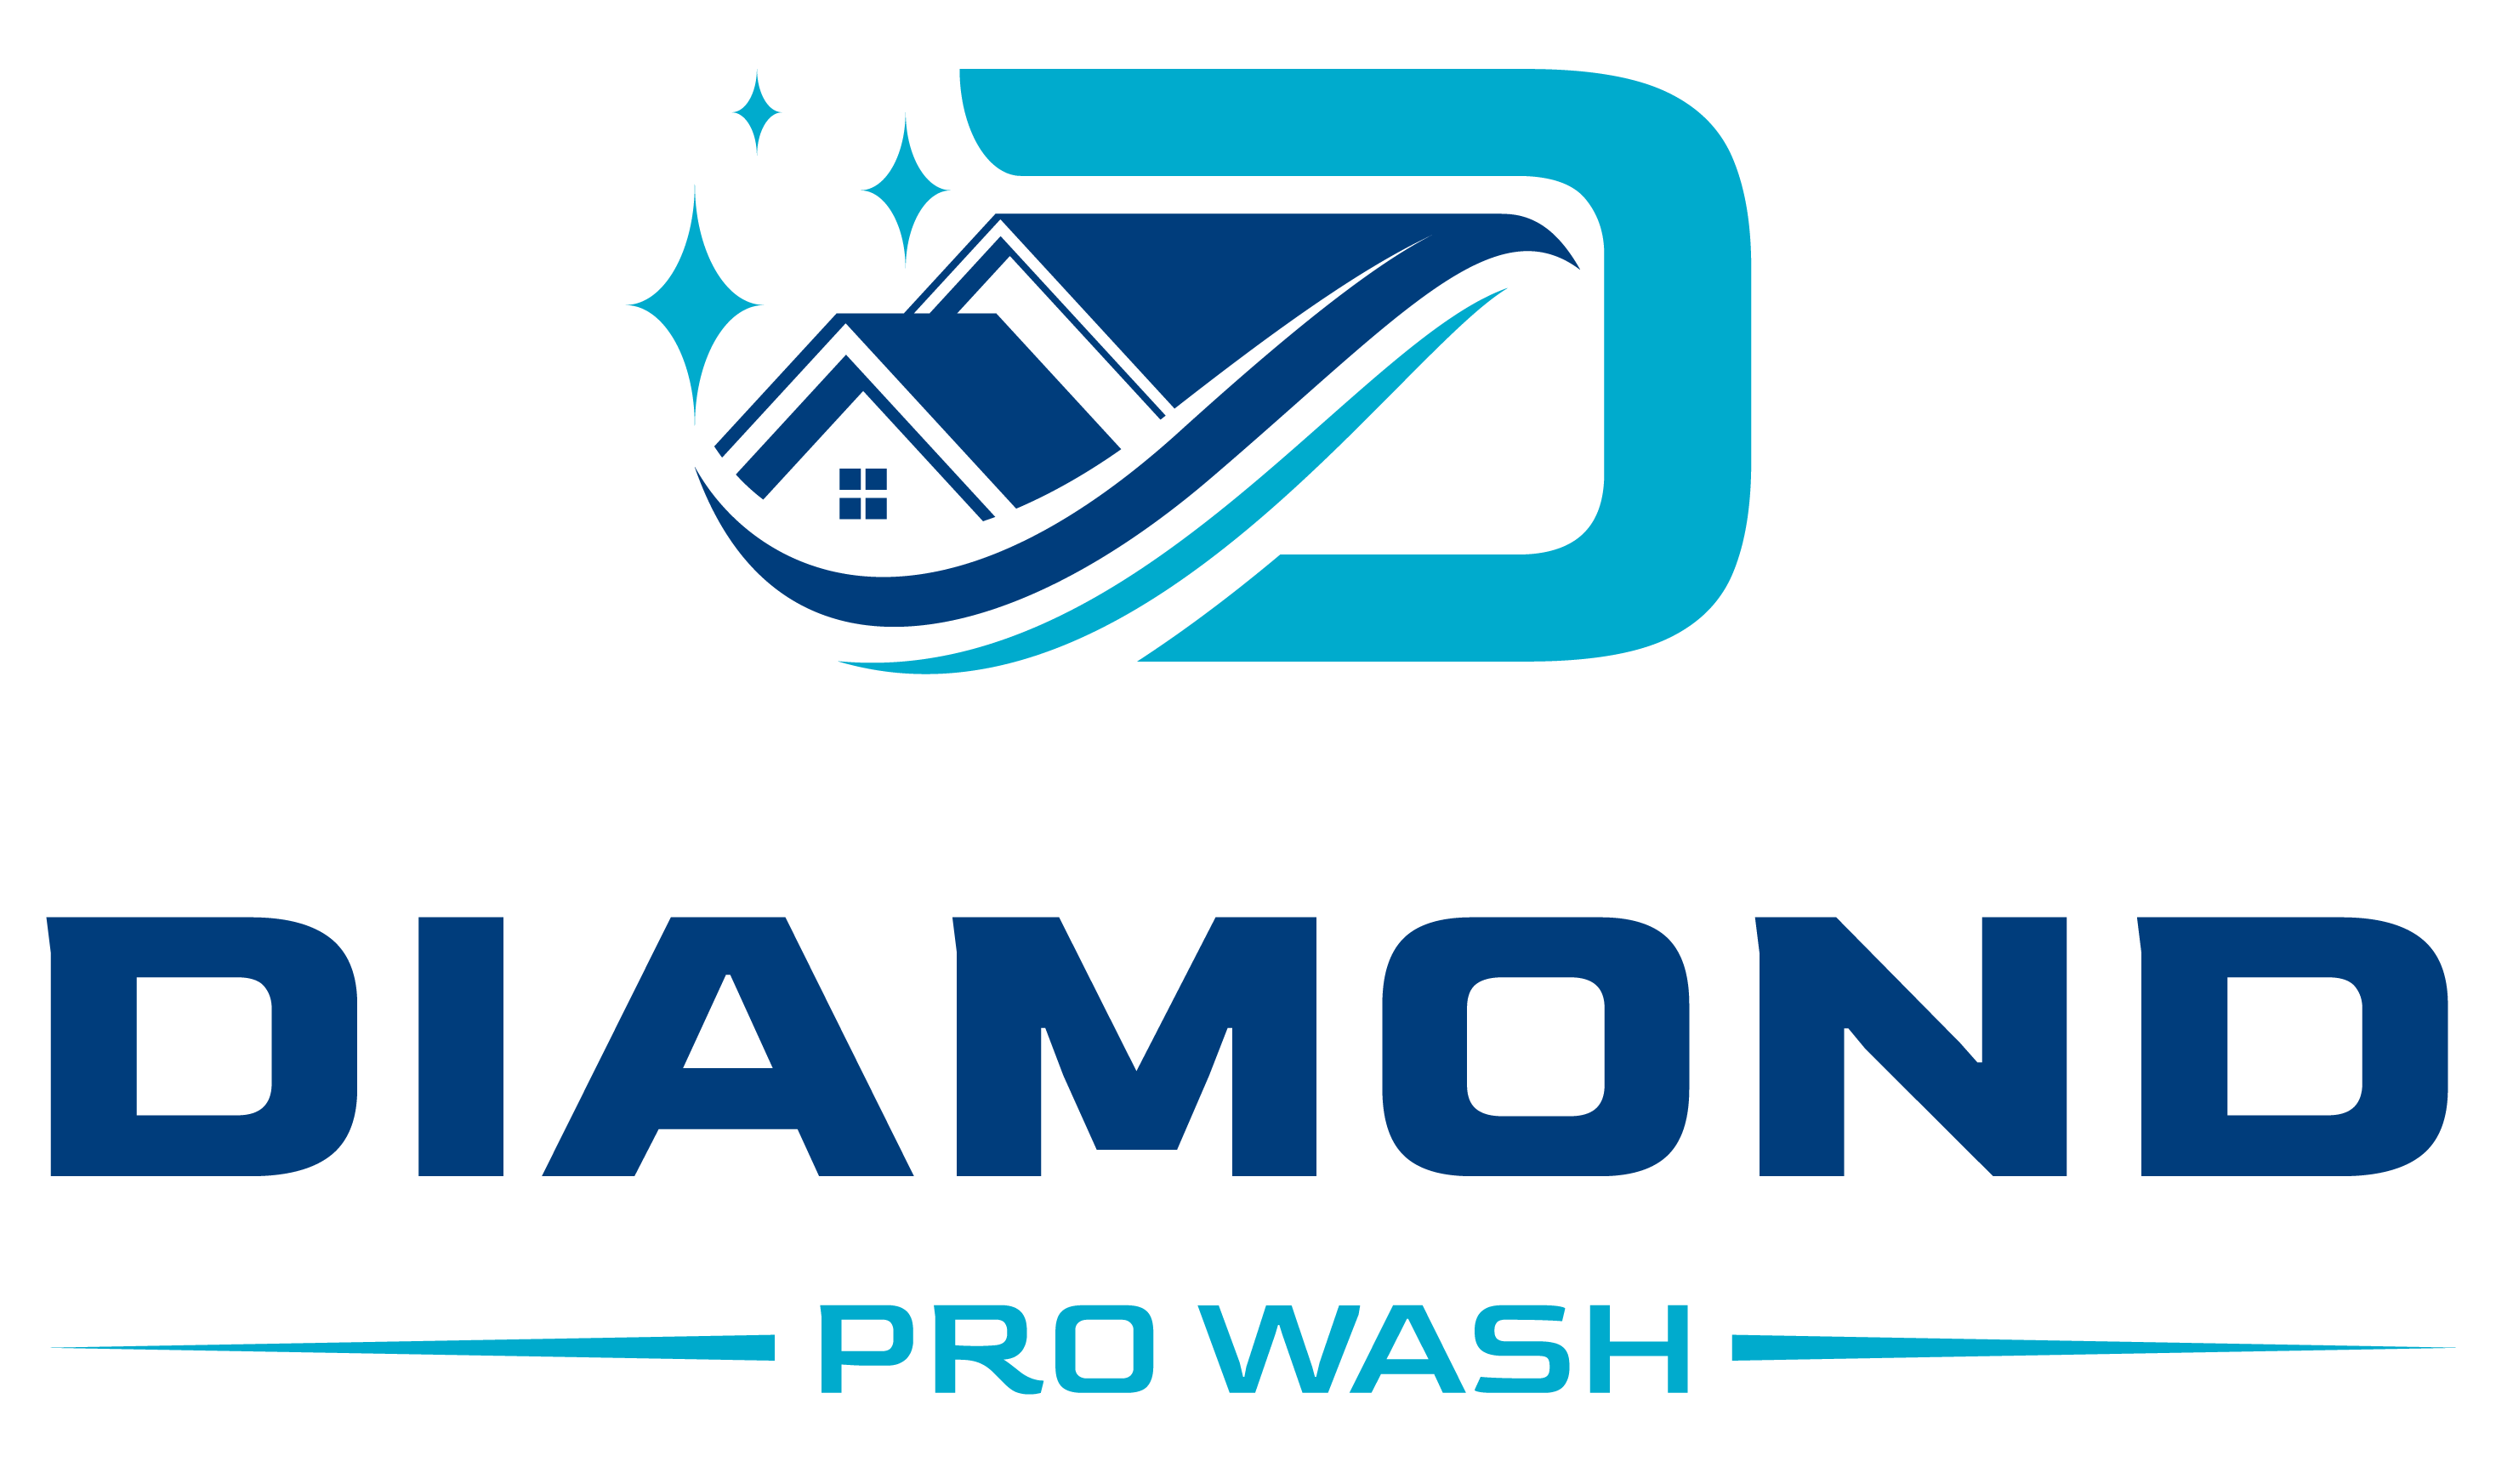 Diamond Pro Wash, LLC revitalizes residential roofs and safeguards their structural integrity.